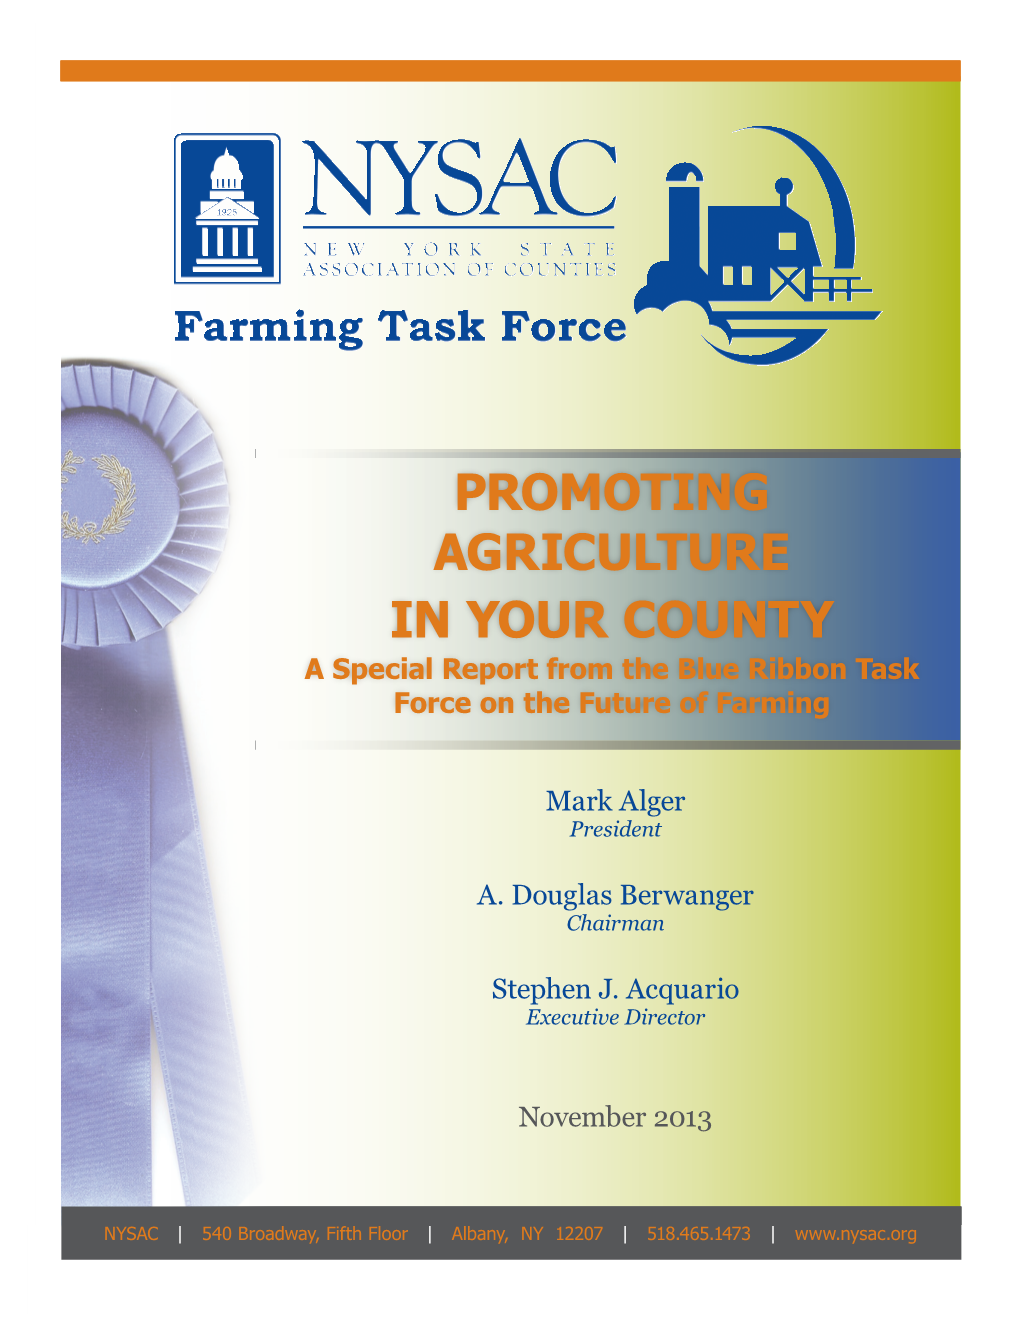 PROMOTING AGRICULTURE in YOUR COUNTY a Special Report from the Blue Ribbon Task Force on the Future of Farming